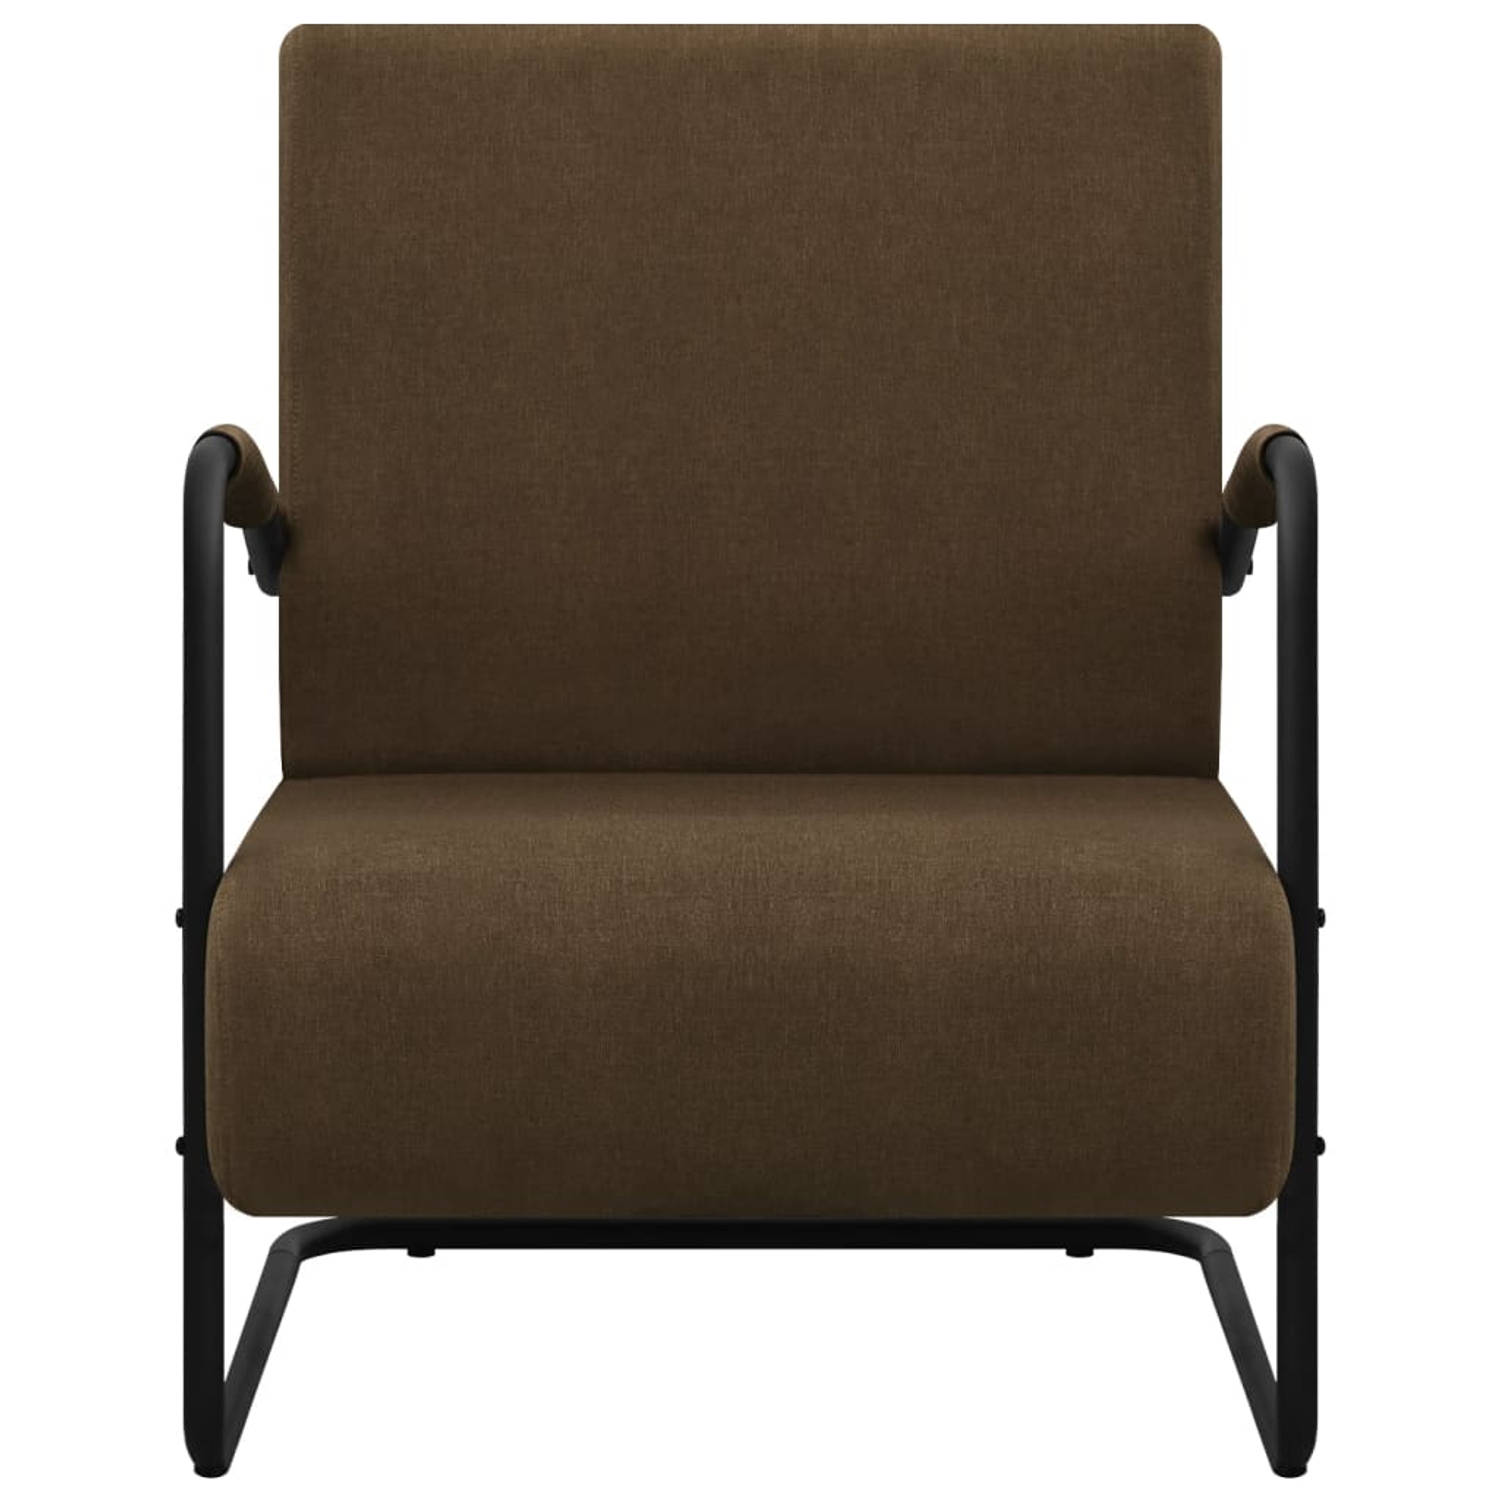 The Living Store Fauteuil stof donkerbruin - Fauteuil